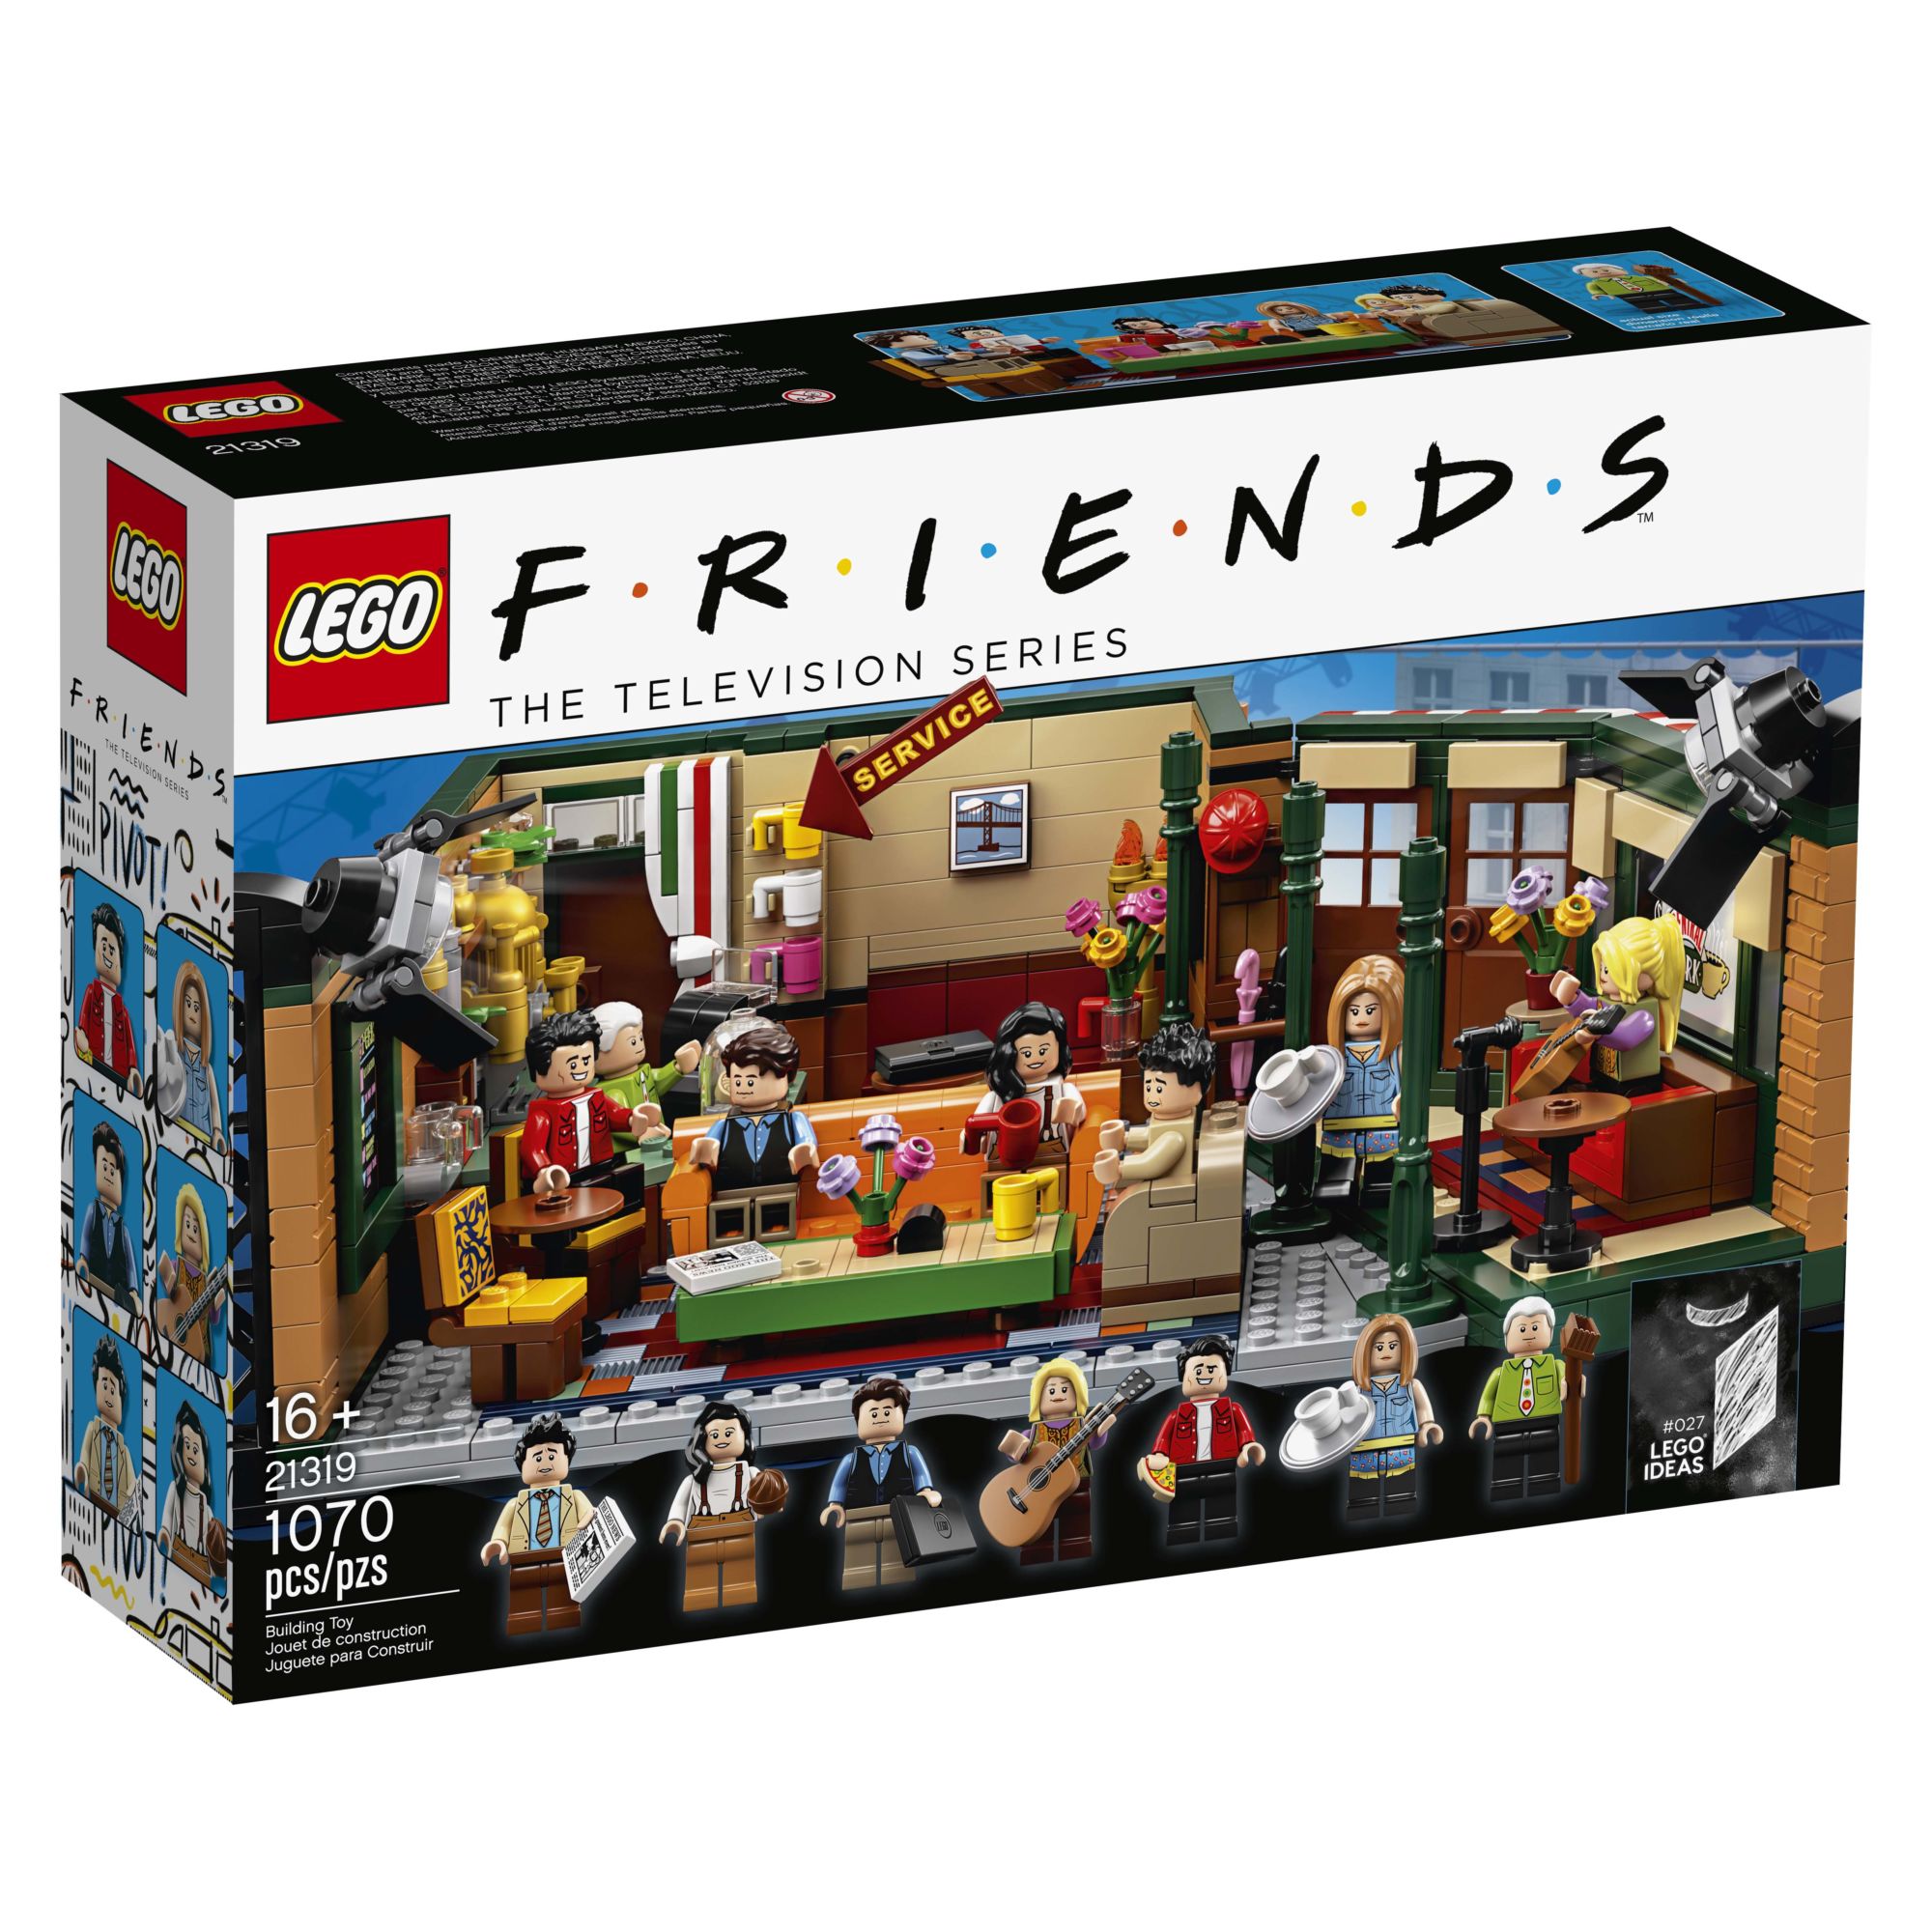 Will You Be There For This Friends Central Perk Lego Set? - MOJEH MEN